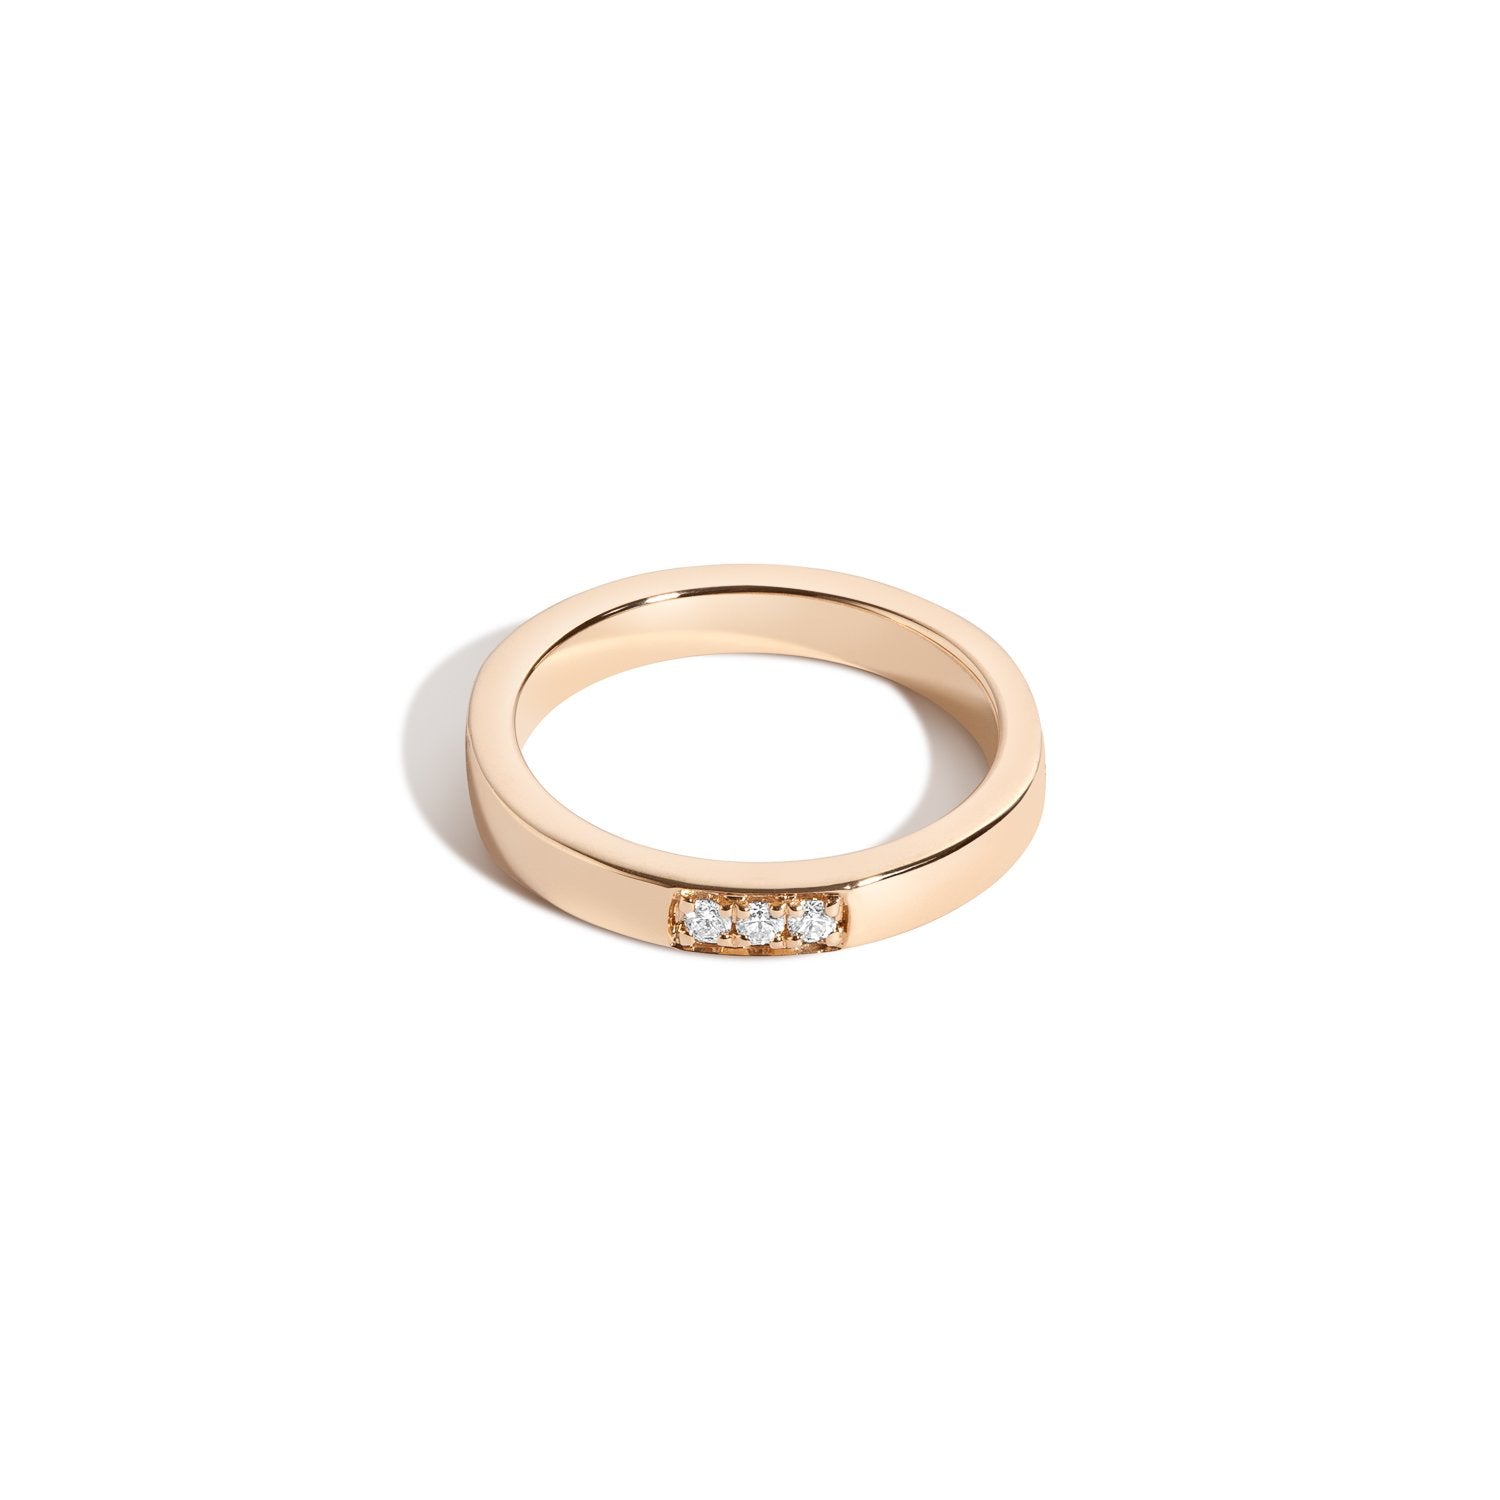 Shahla Karimi Jewelry Morse Code Series Ring 14K Yellow Gold - Letter "S"